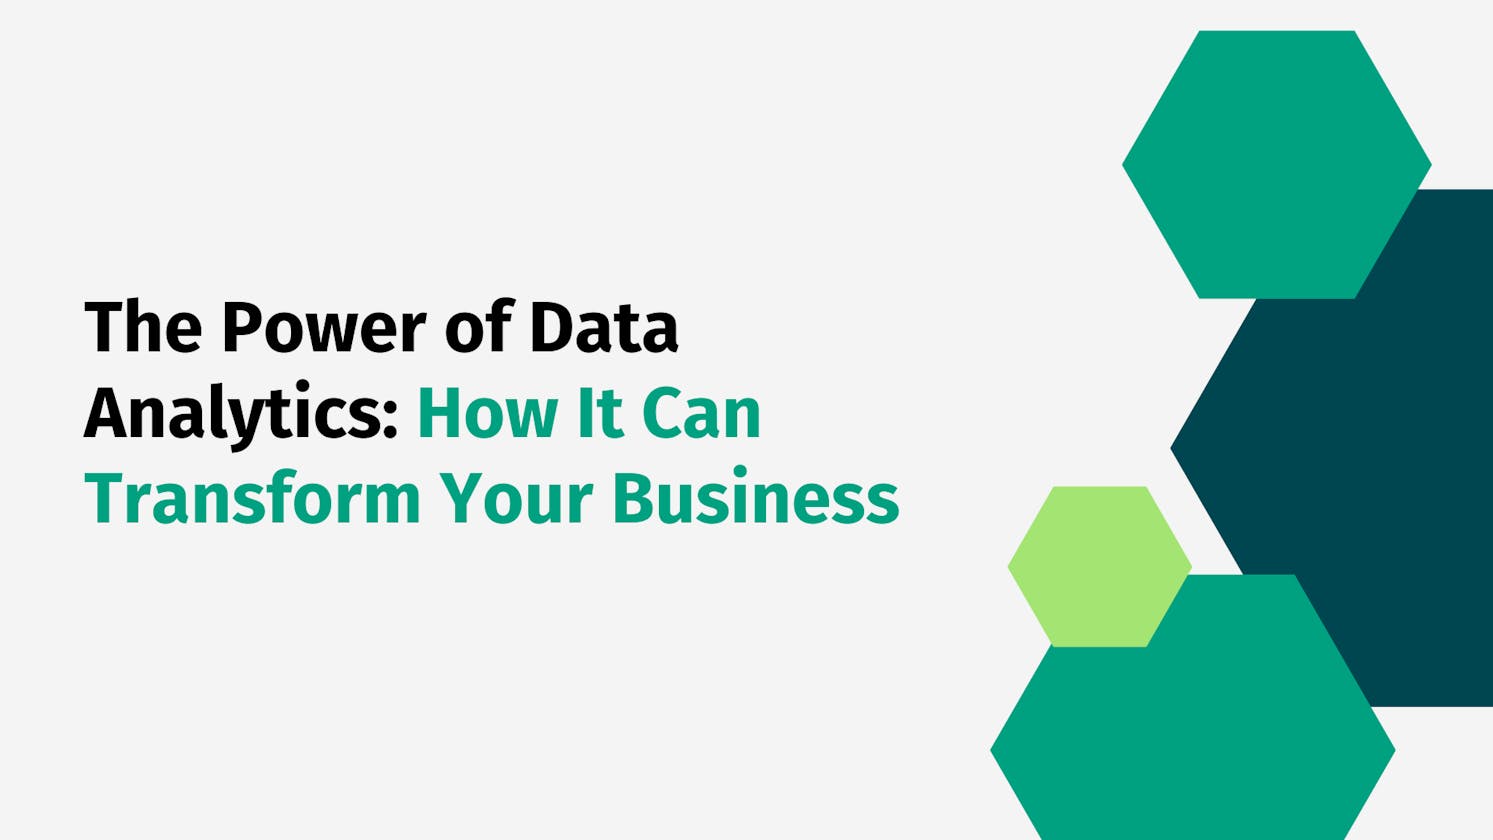 The Power of Data Analytics: How It Can Transform Your Business